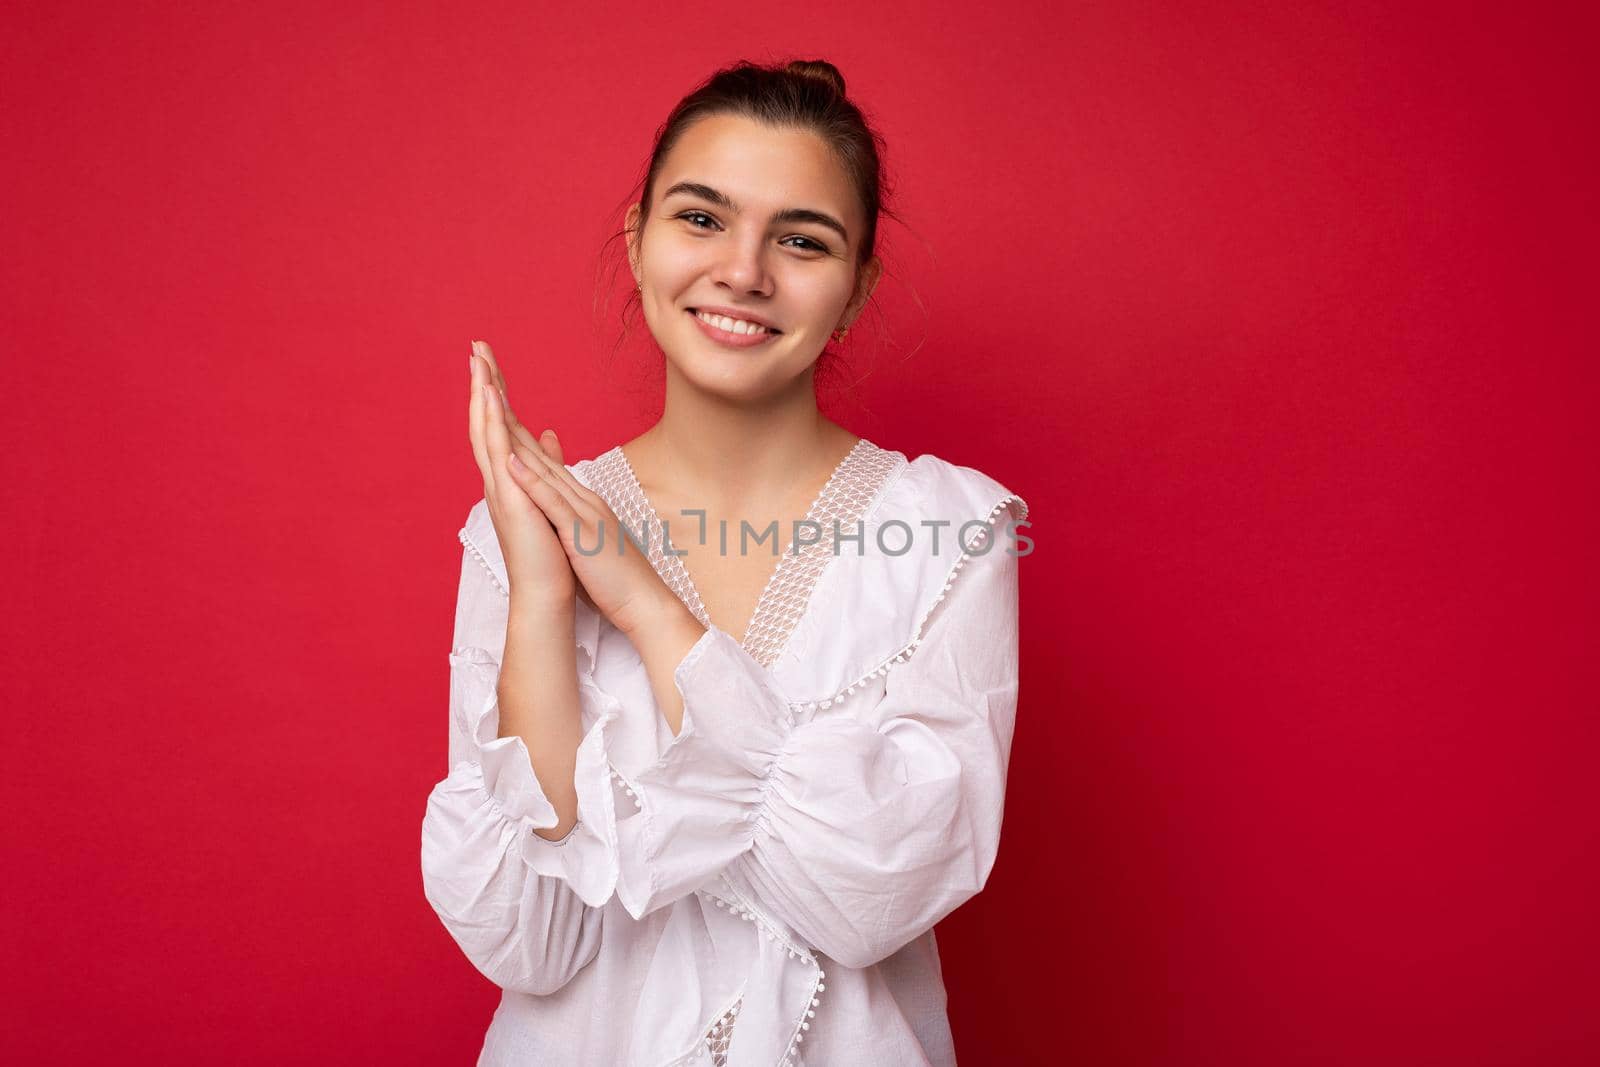 Young beautiful european stylish brunette woman wearing white blouse isolated over red background with positive sincere emotions. Simple and natural looking at the camera. Free space.